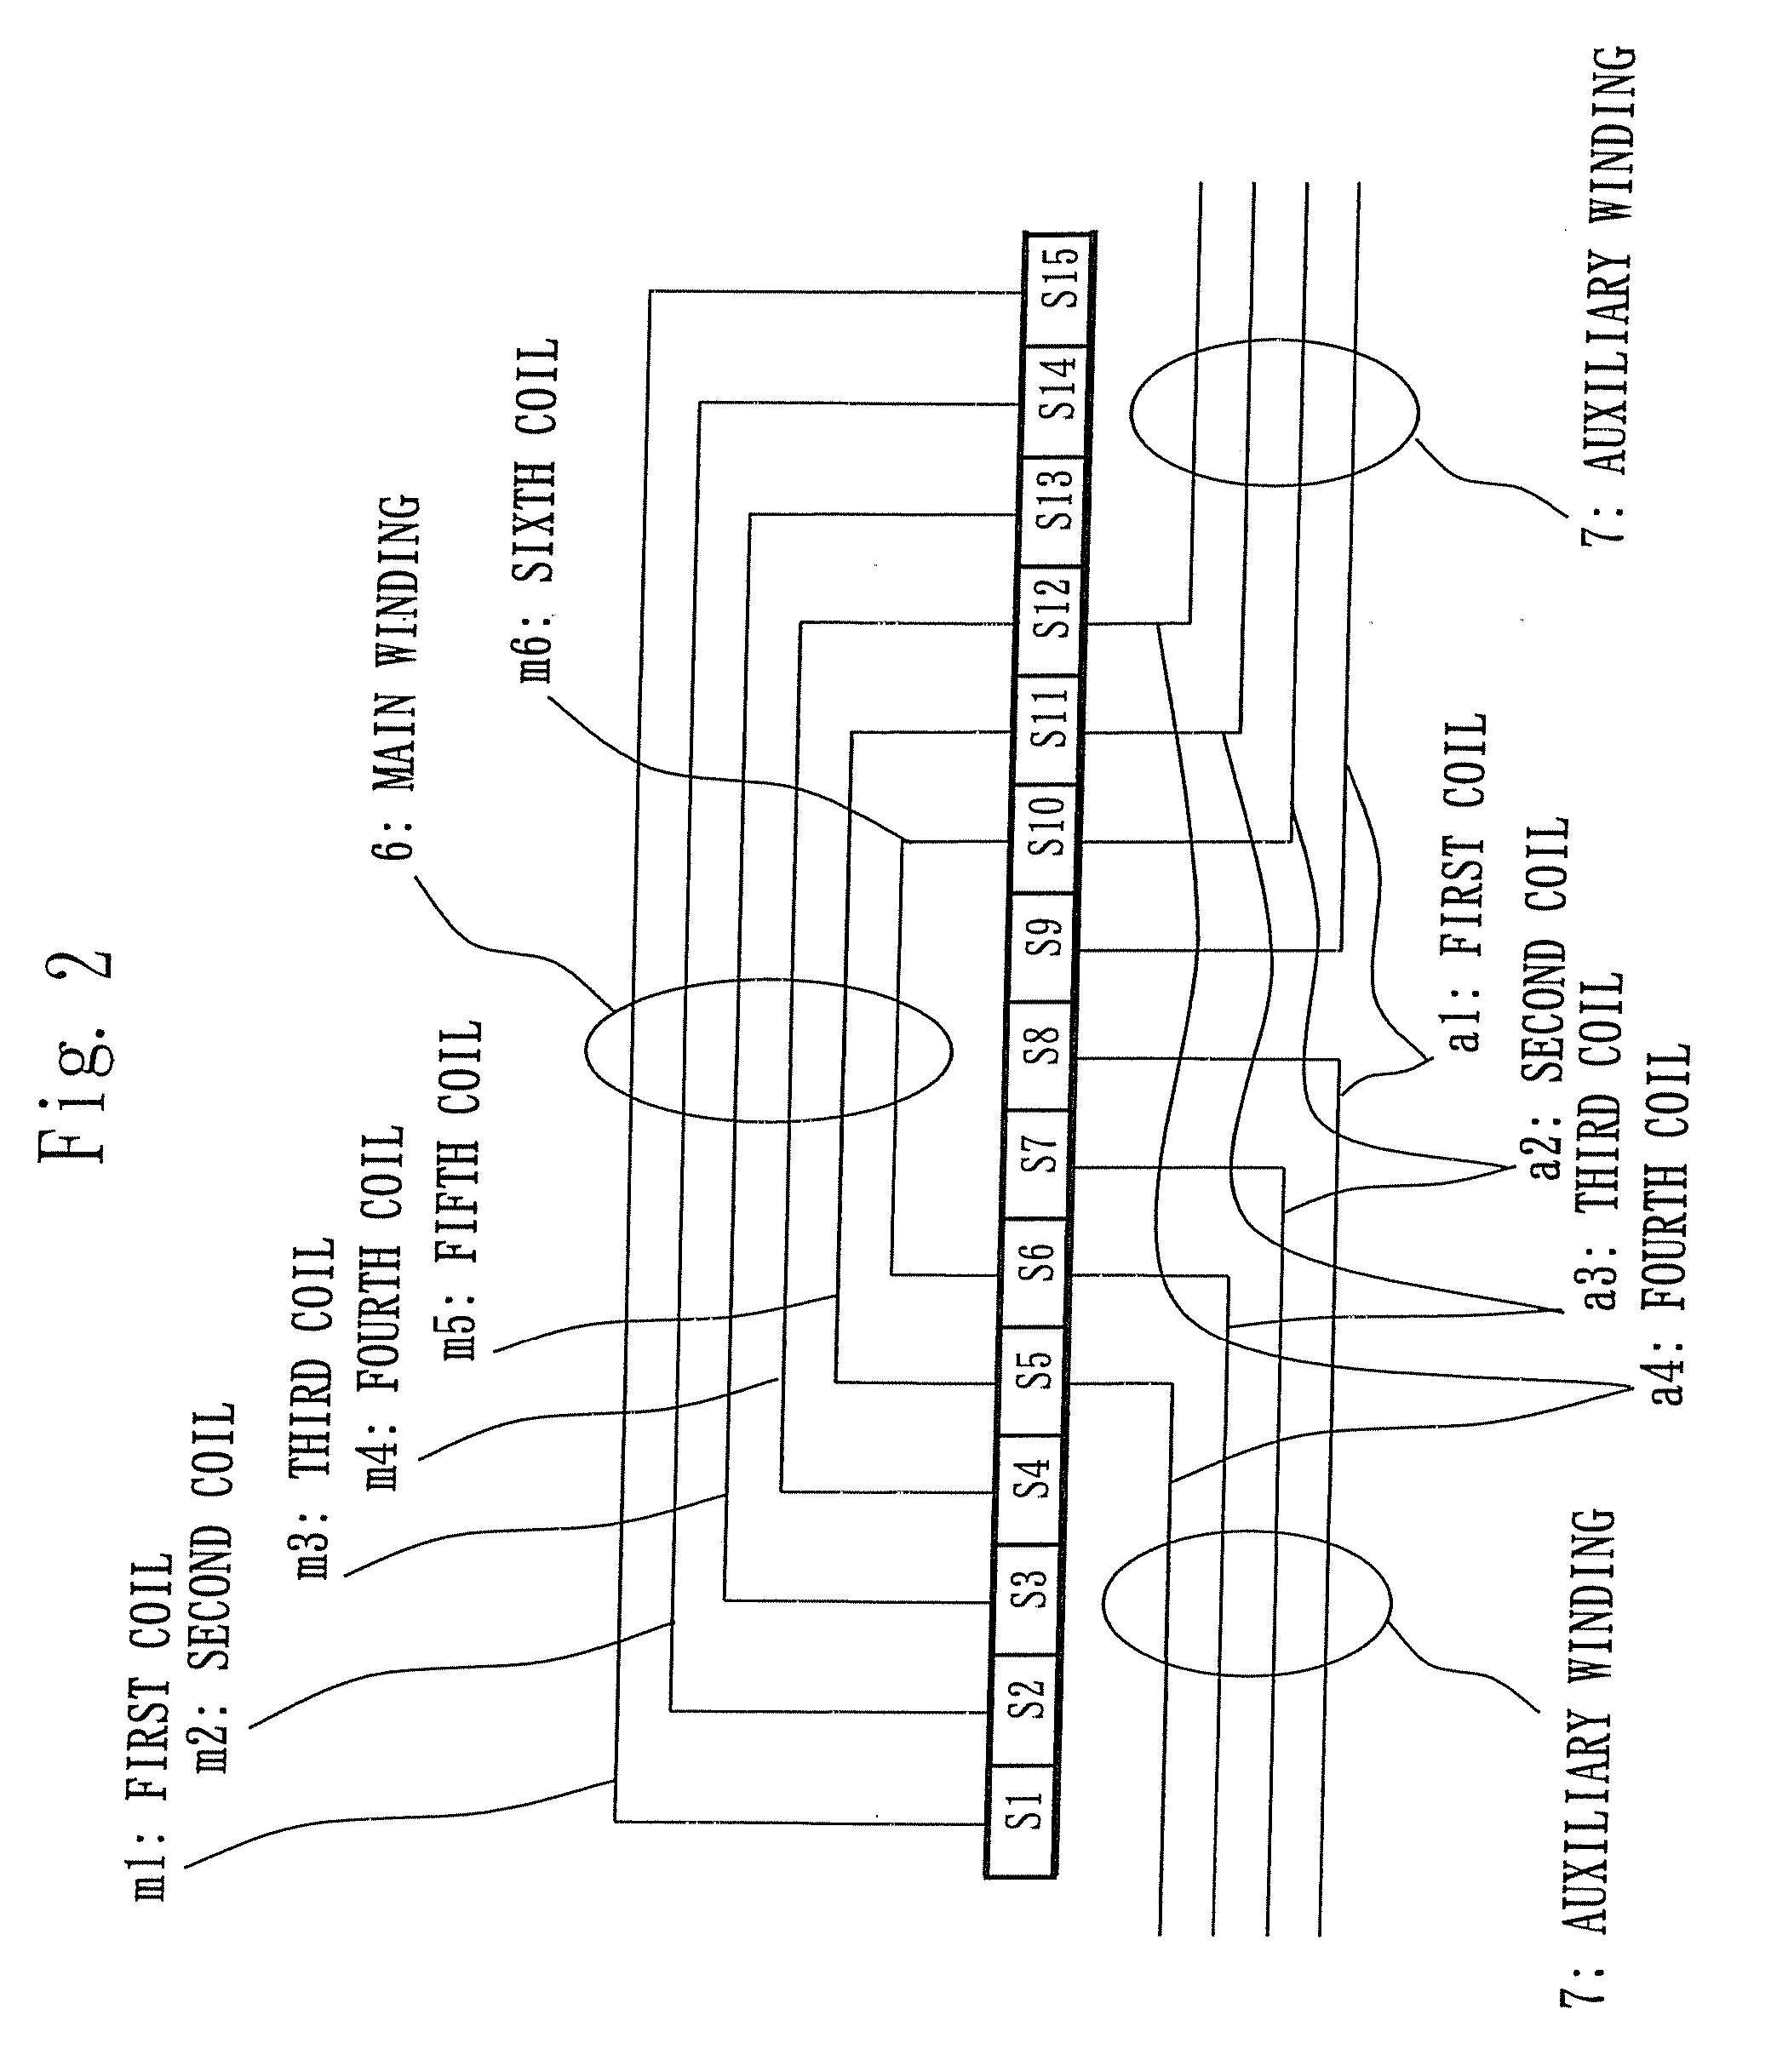 Single-phase motor and hermetic compressor